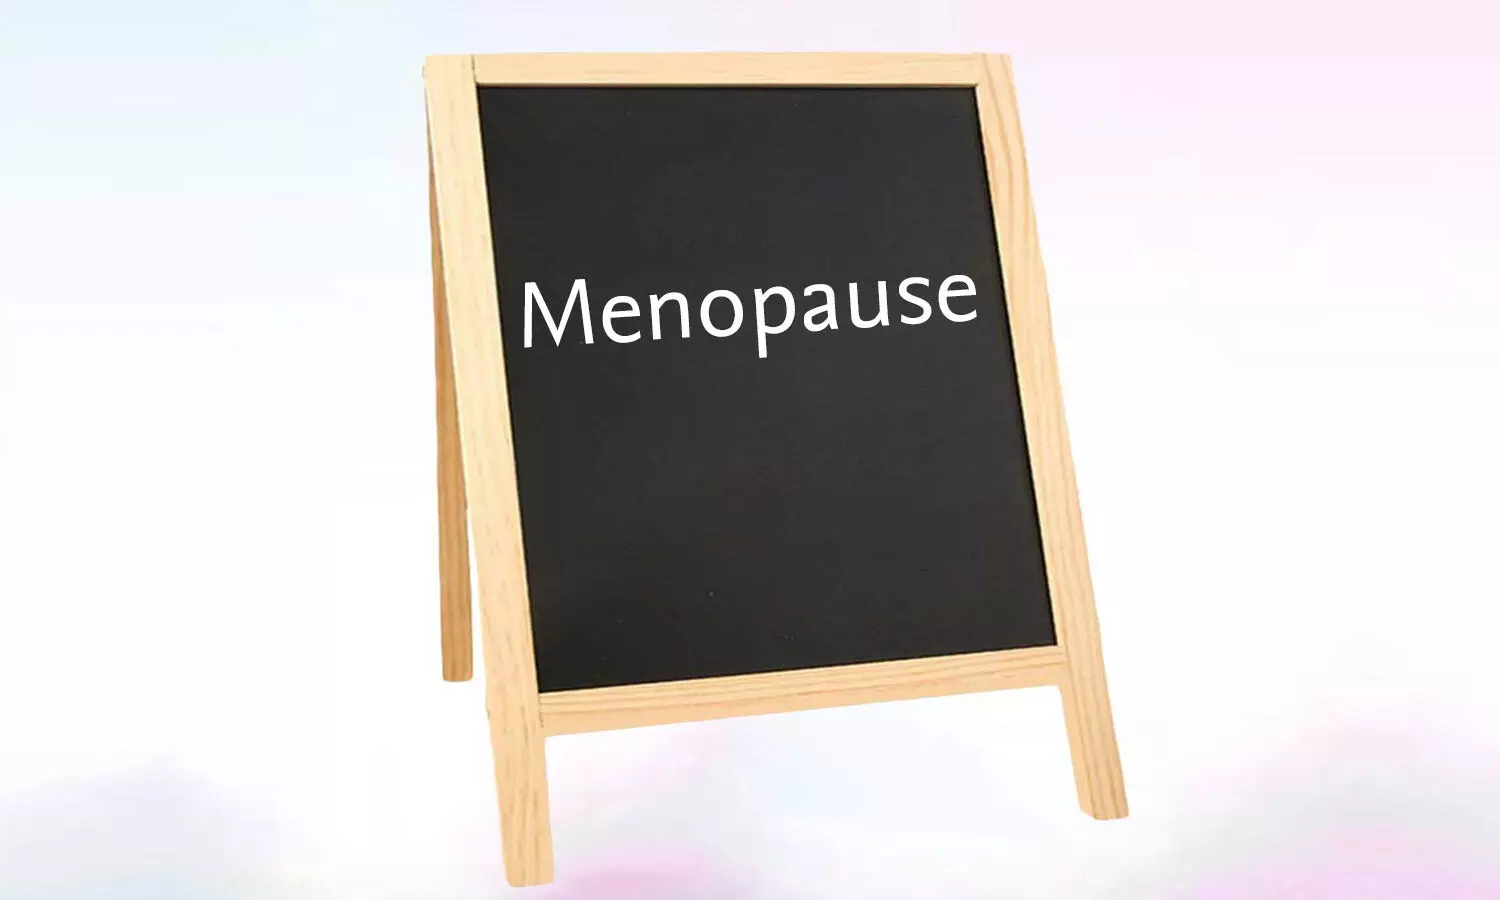 Non-hormonal treatment for menopausal symptoms offers hope of relief